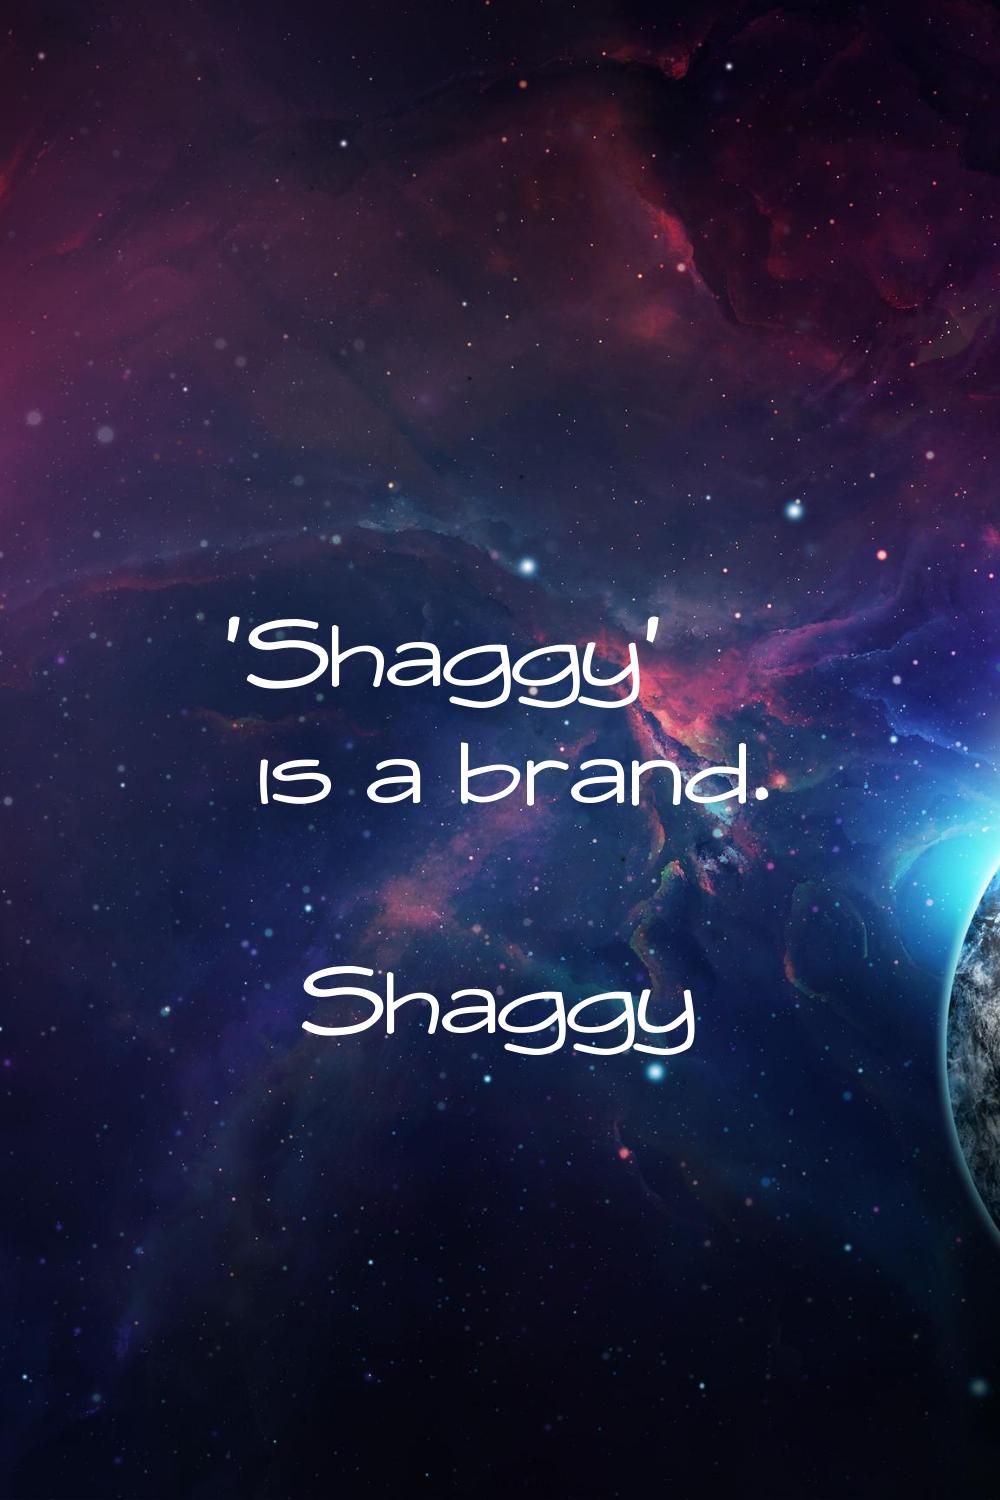 'Shaggy' is a brand.